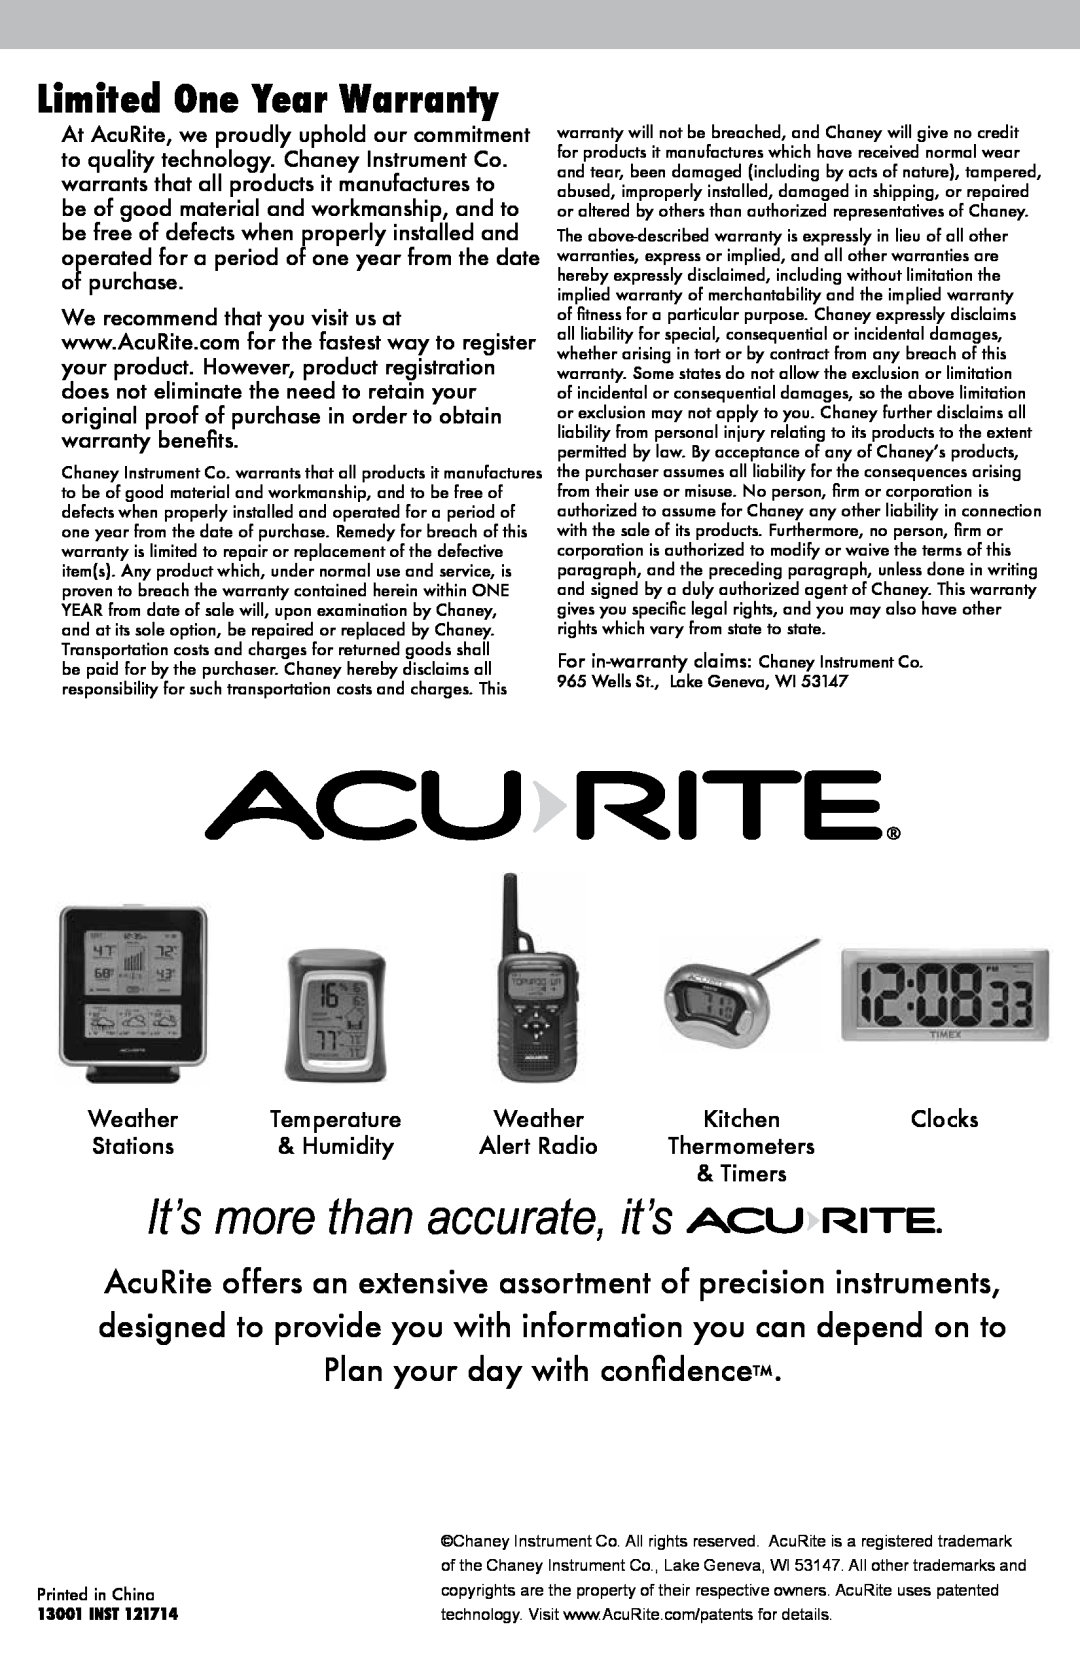 Acu-Rite 13002, 13001 instruction manual Limited One Year Warranty, It’s more than accurate, it’s 